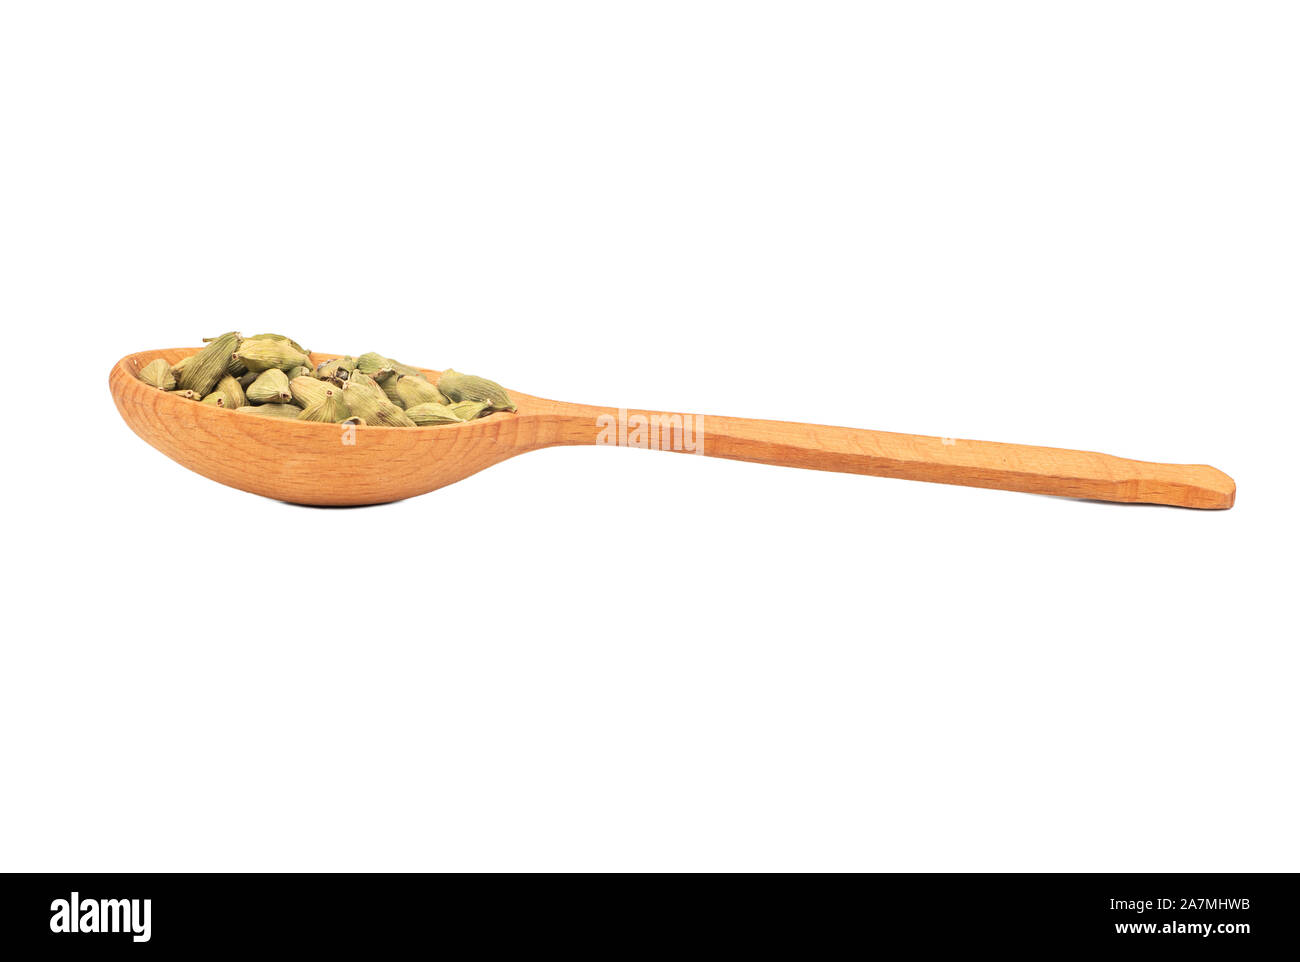 Large wooden spoon with dry cardamom isolated on white background Stock Photo